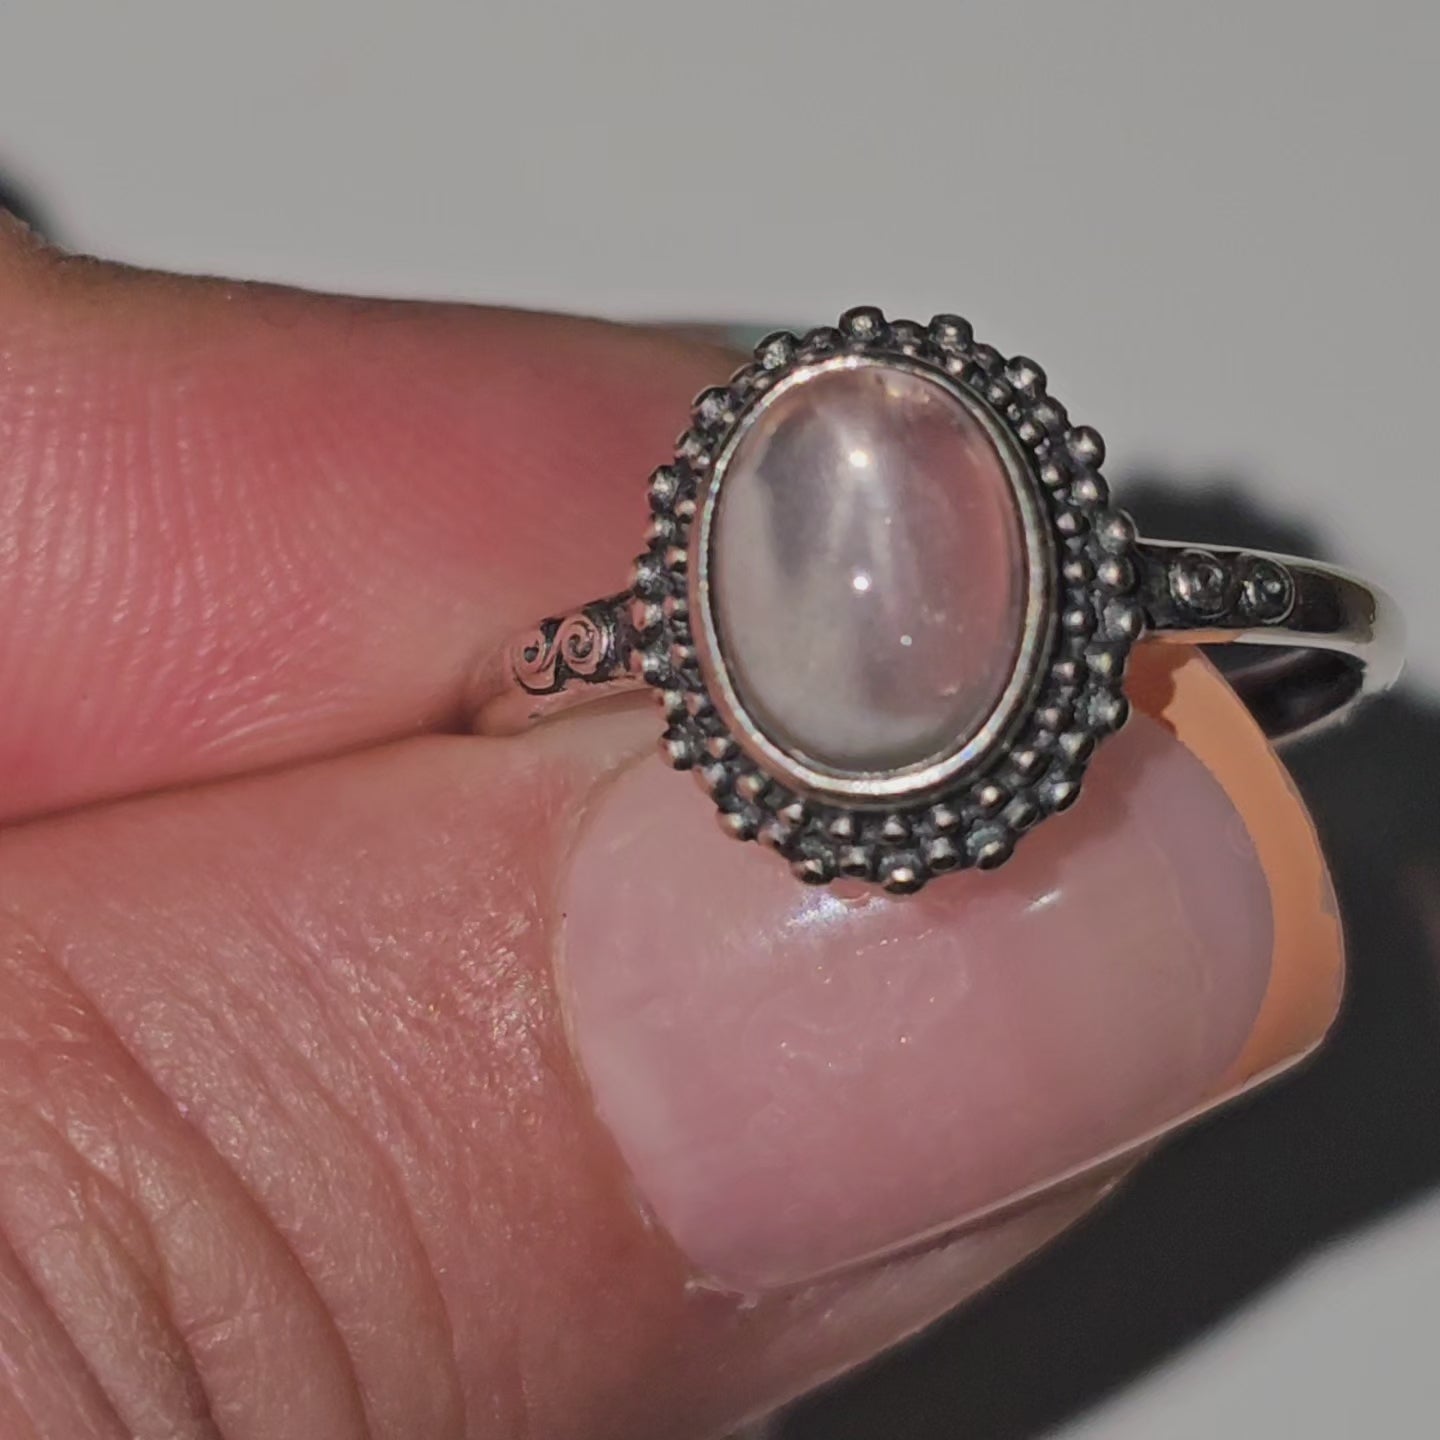 This adjustable ring is crafted from sterling silver and features an oval Star Rose Quartz stone on a beaded bezel, with swirl details on the shoulders of the ring band.